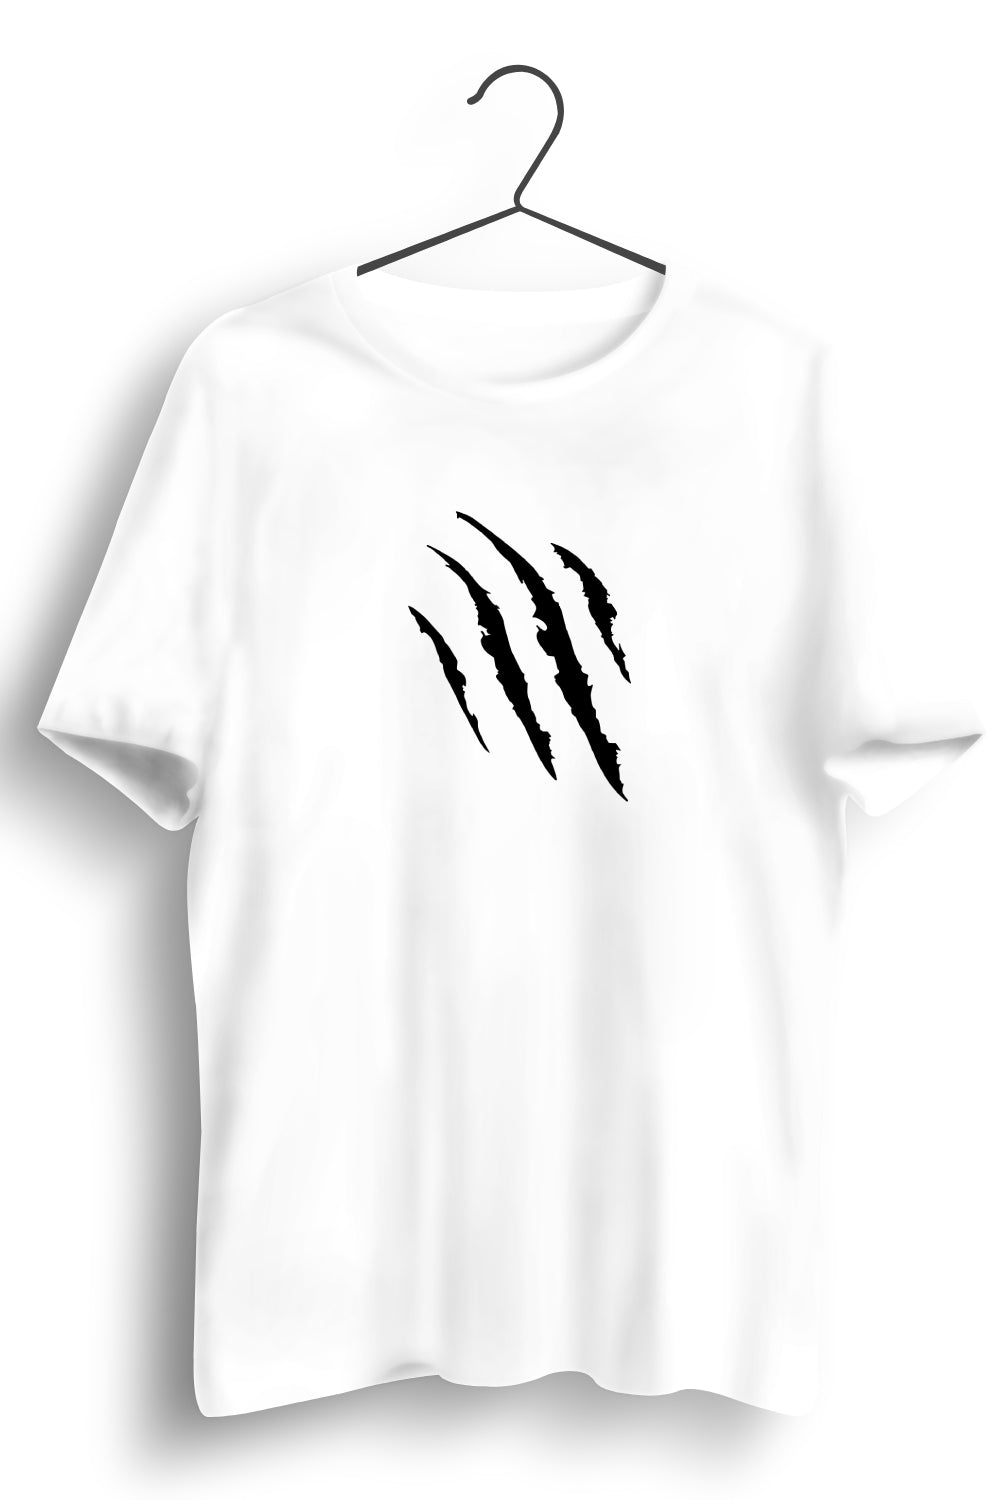 Panther Claw Graphic Printed White Tshirt